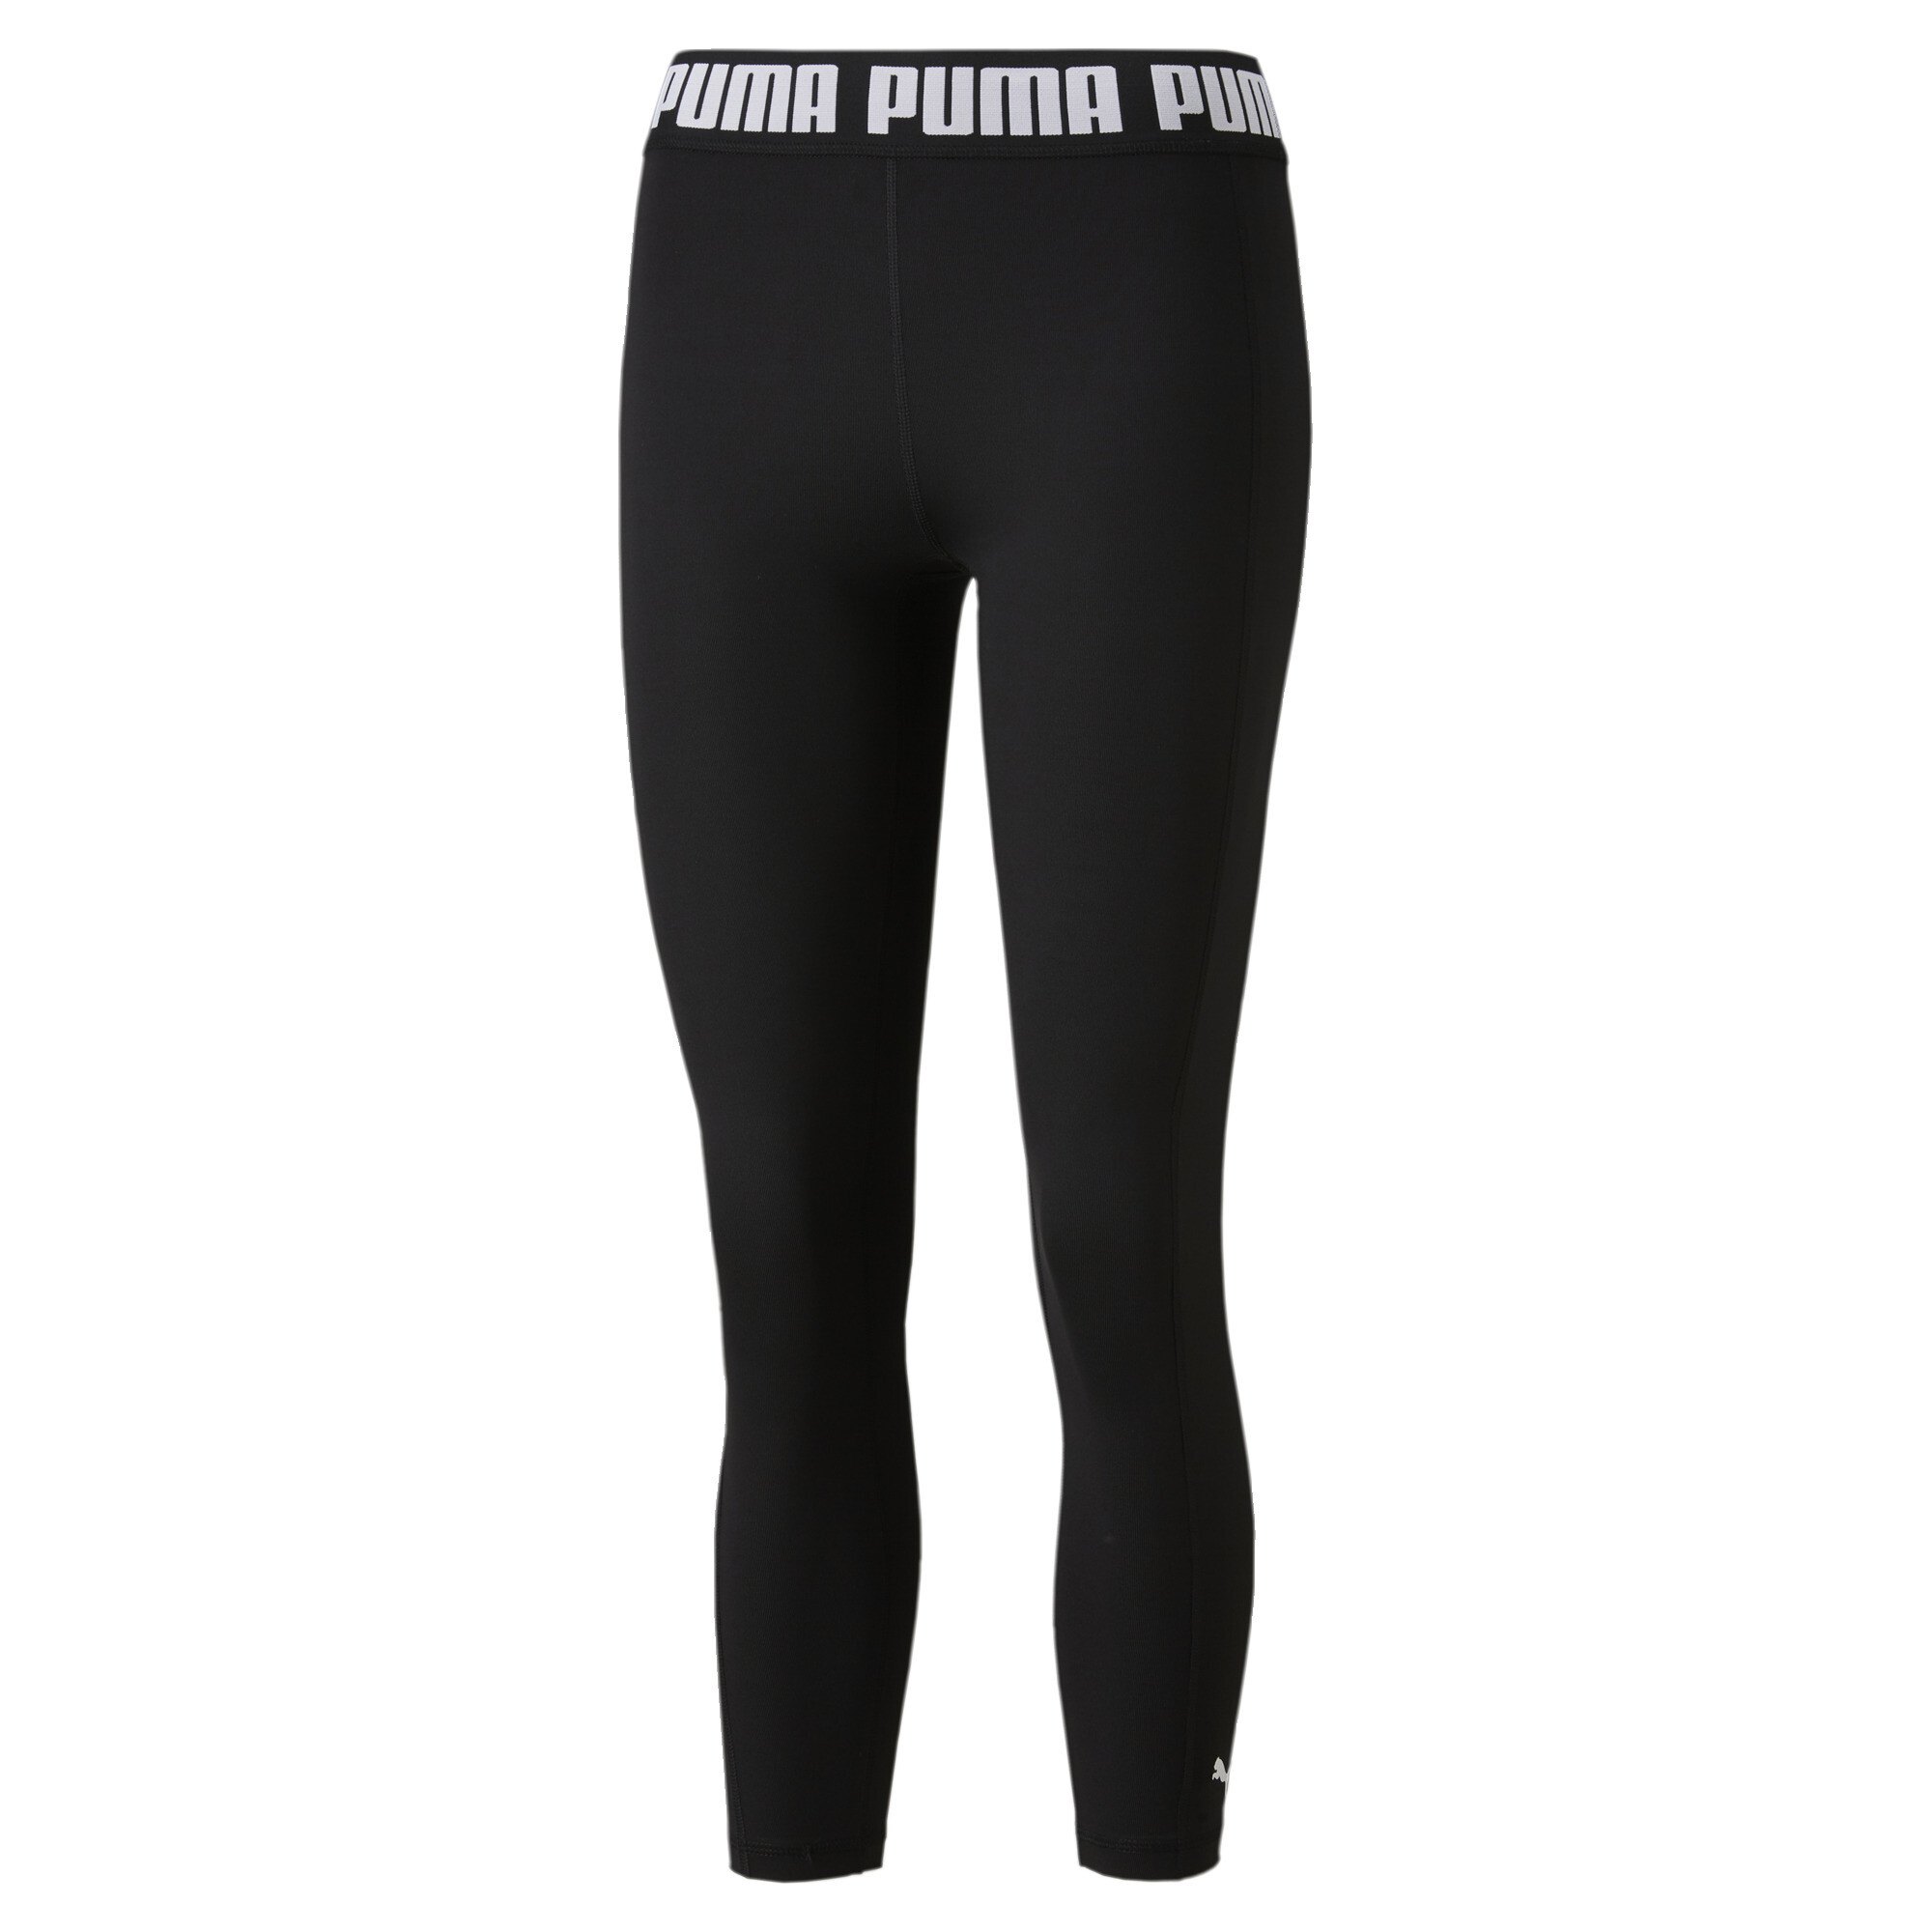 Women's PUMA Strong High Waisted Training Leggings In 10 - Black, Size XL